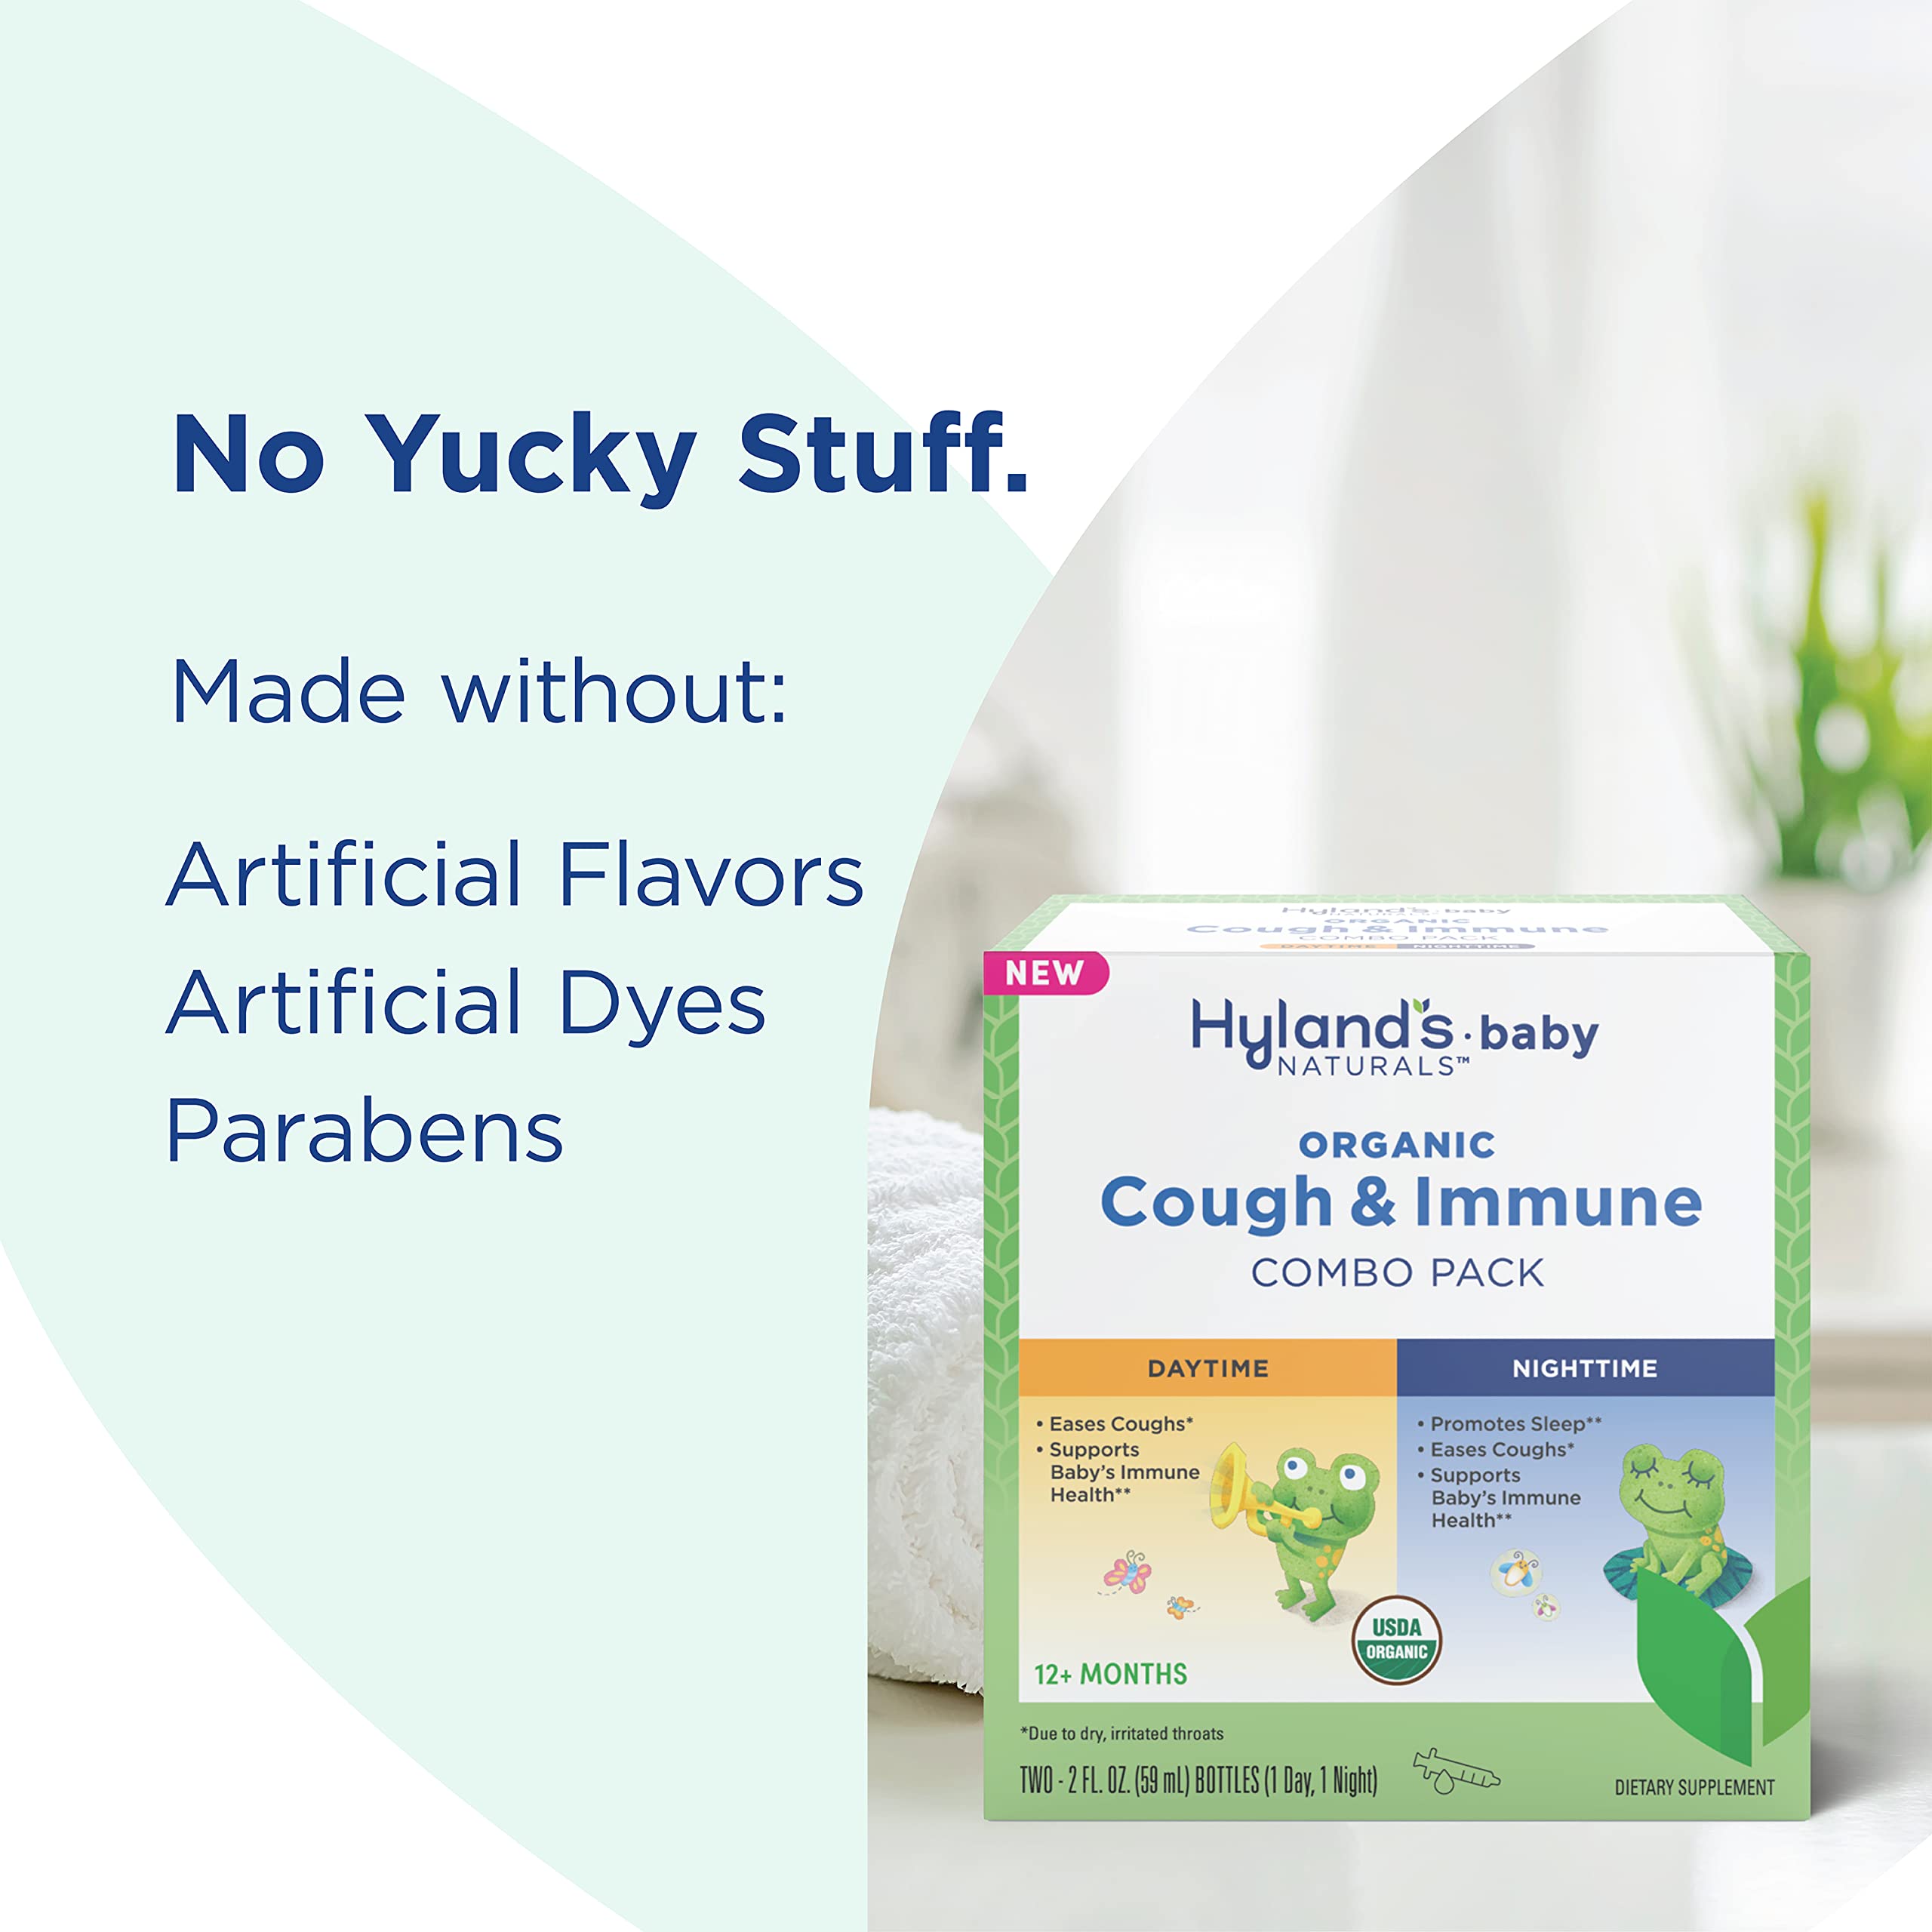 Hyland’s Naturals - Baby - Organic Cough & Immune Day & Night Combo Pack - Eases Coughs, Supports Immunity, Promotes Sleep, Two 2 Fl Oz. Bottles (4 fl oz)